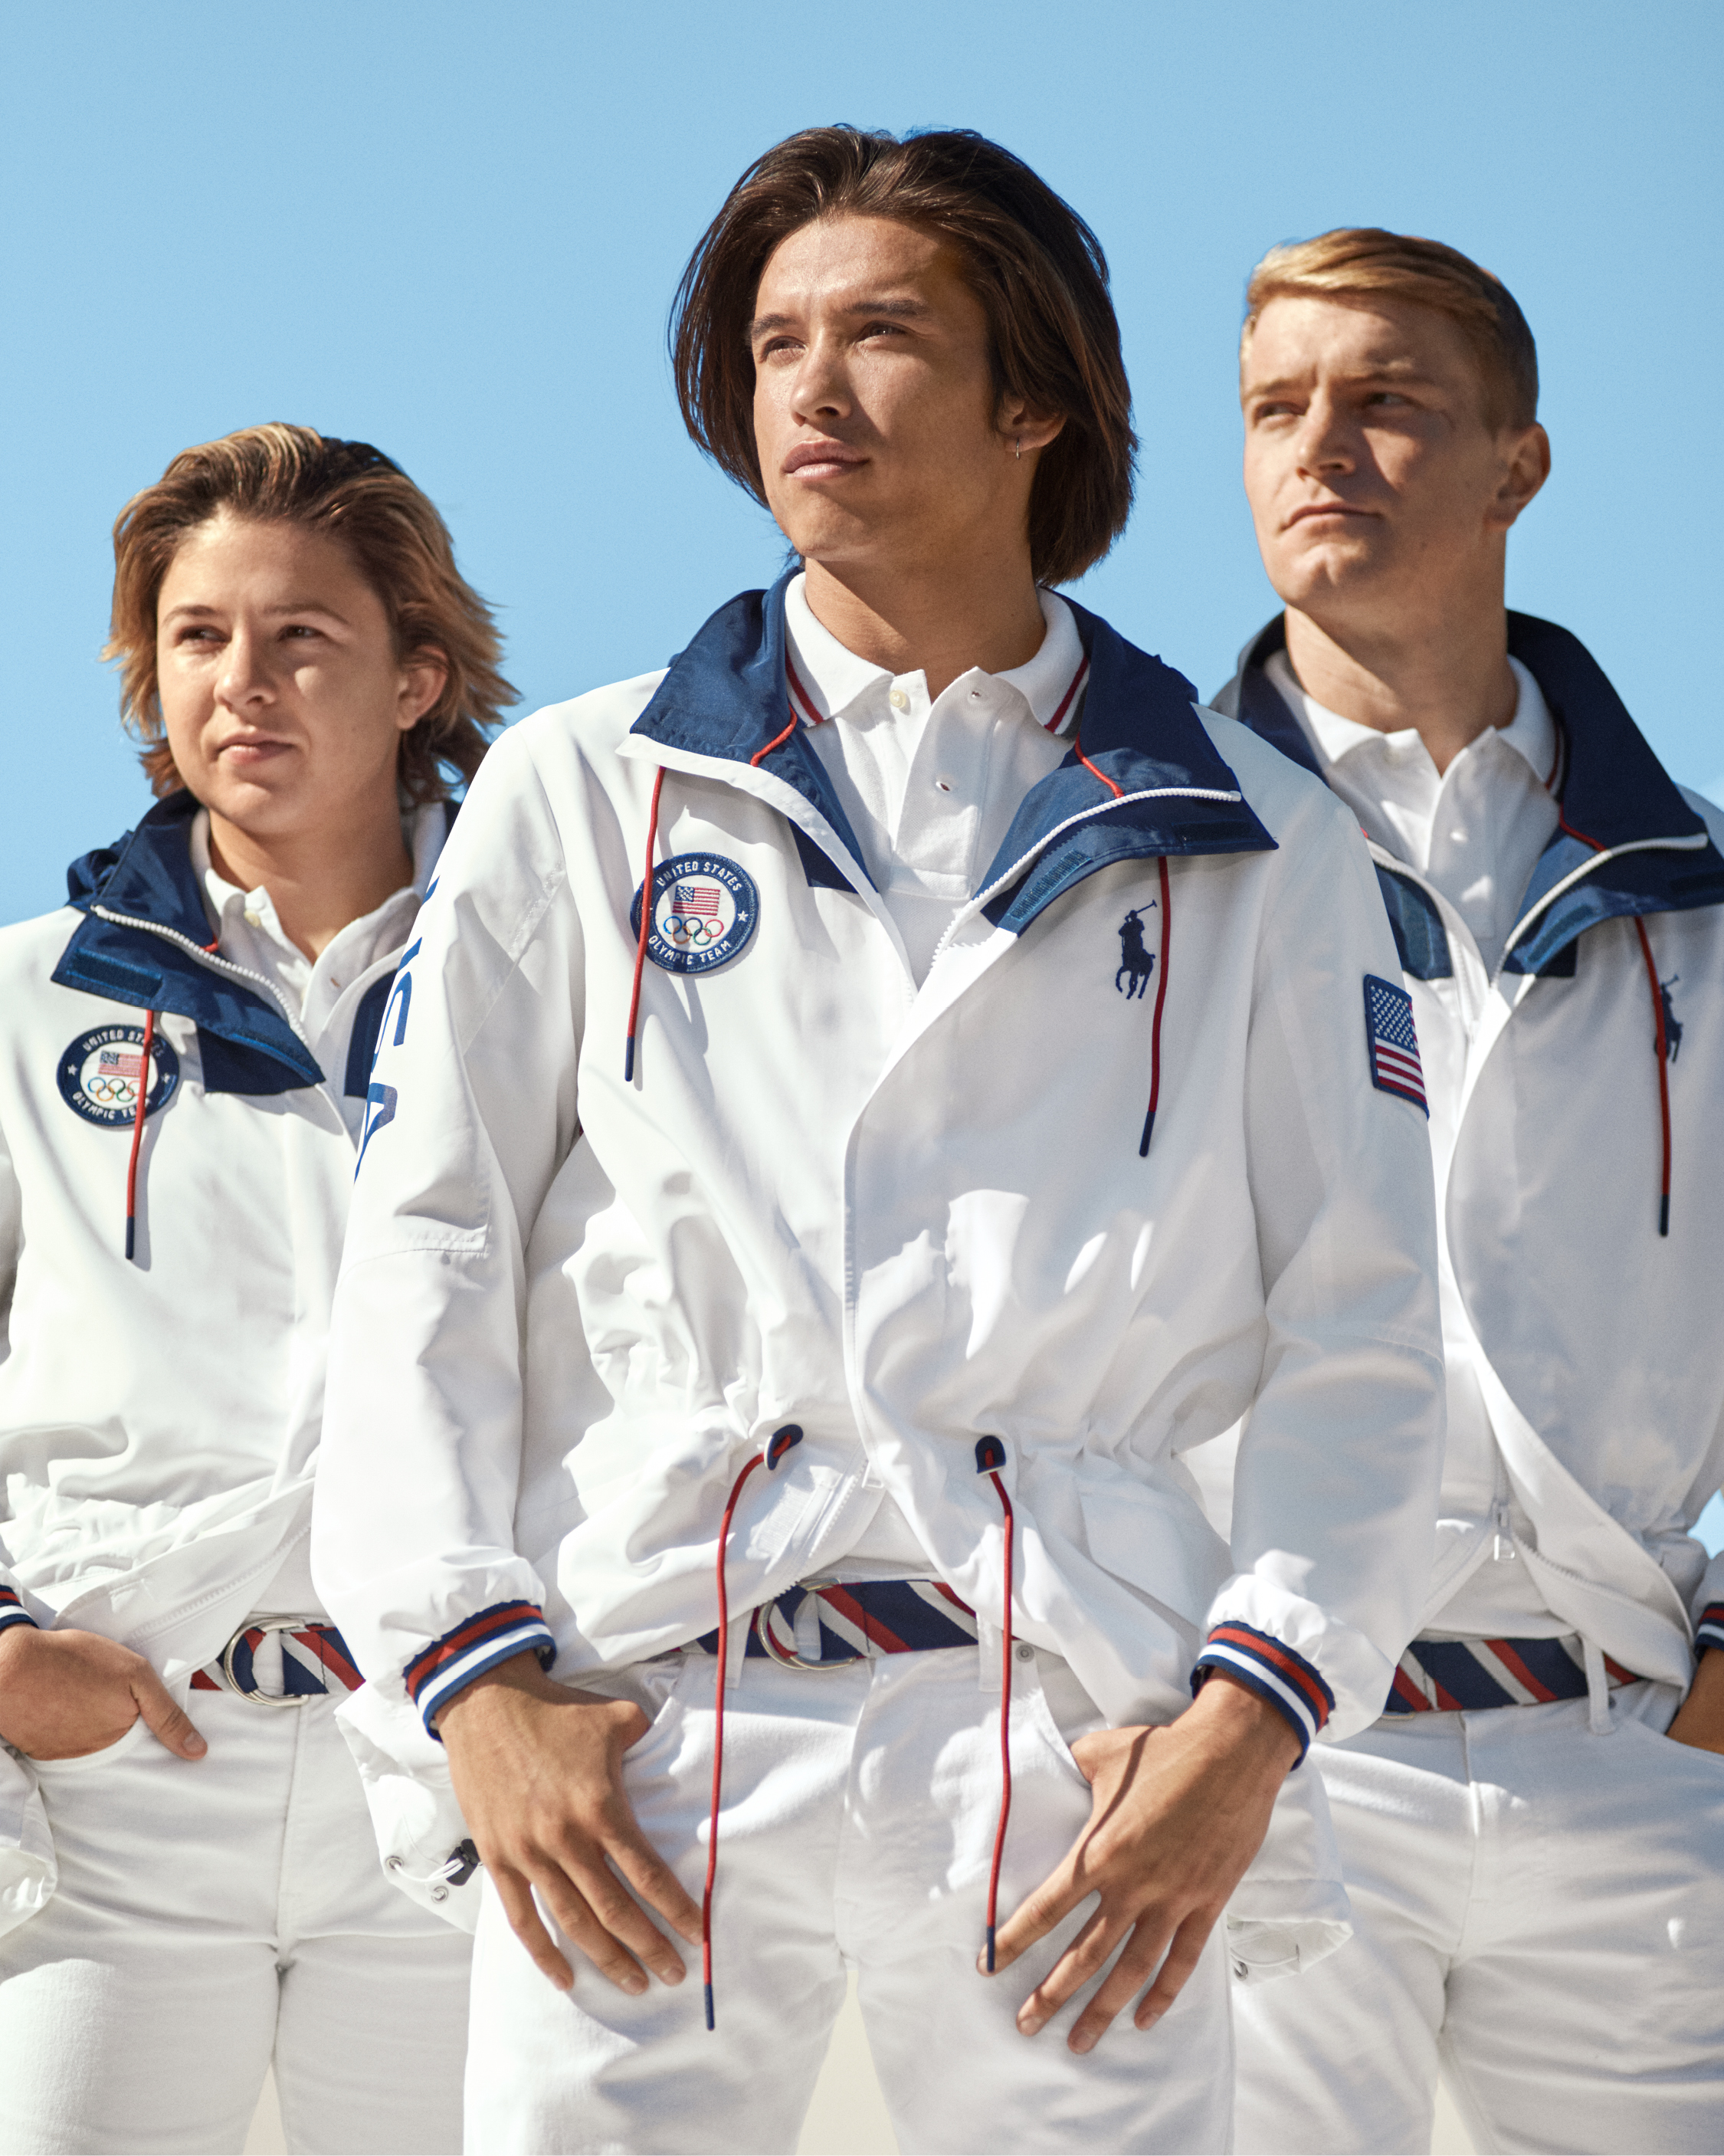 Ralph Lauren on Twitter: "Polo Ralph Lauren unveils the official U.S.  Olympic and Paralympic Team Closing Ceremony uniforms, proudly made in  America Featuring our @TeamUSA athletes: Skateboarders Heimana Reynolds and  @JordynBarratt, and